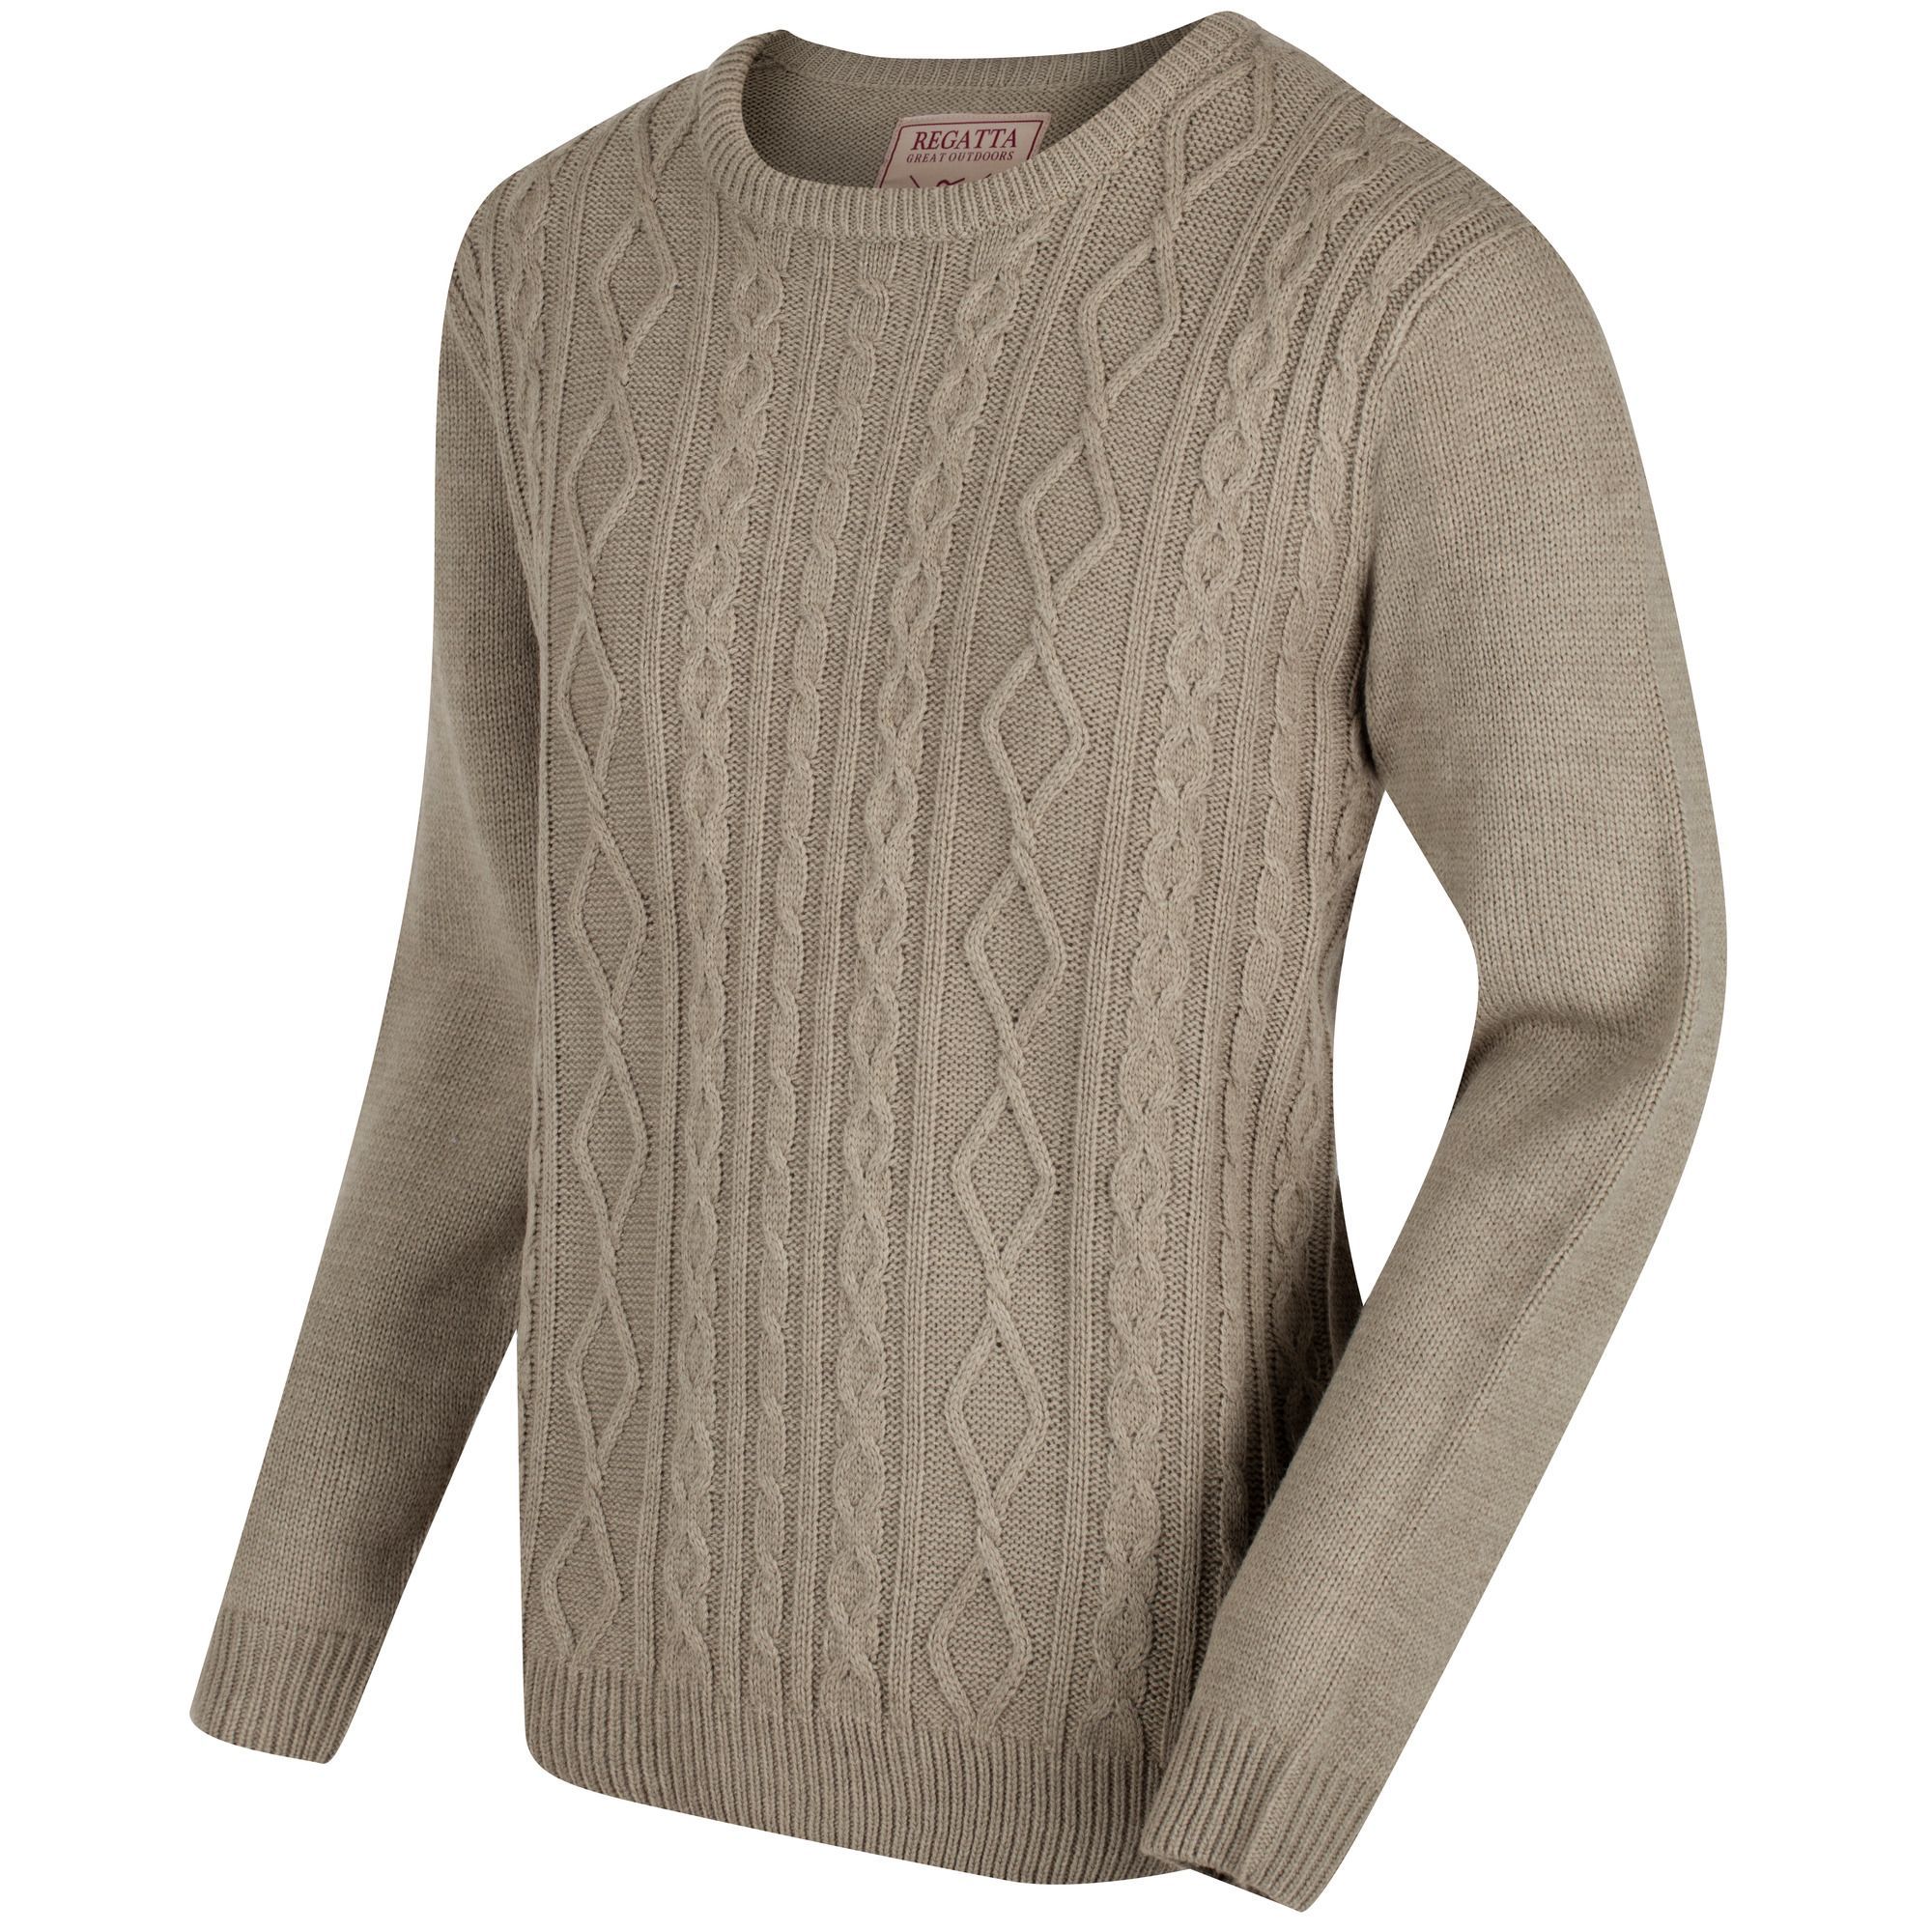 Classic crew neck jumper with a cable knit front for added insulation and durability. 85% acrylic. 15% wool. 5gg knit.